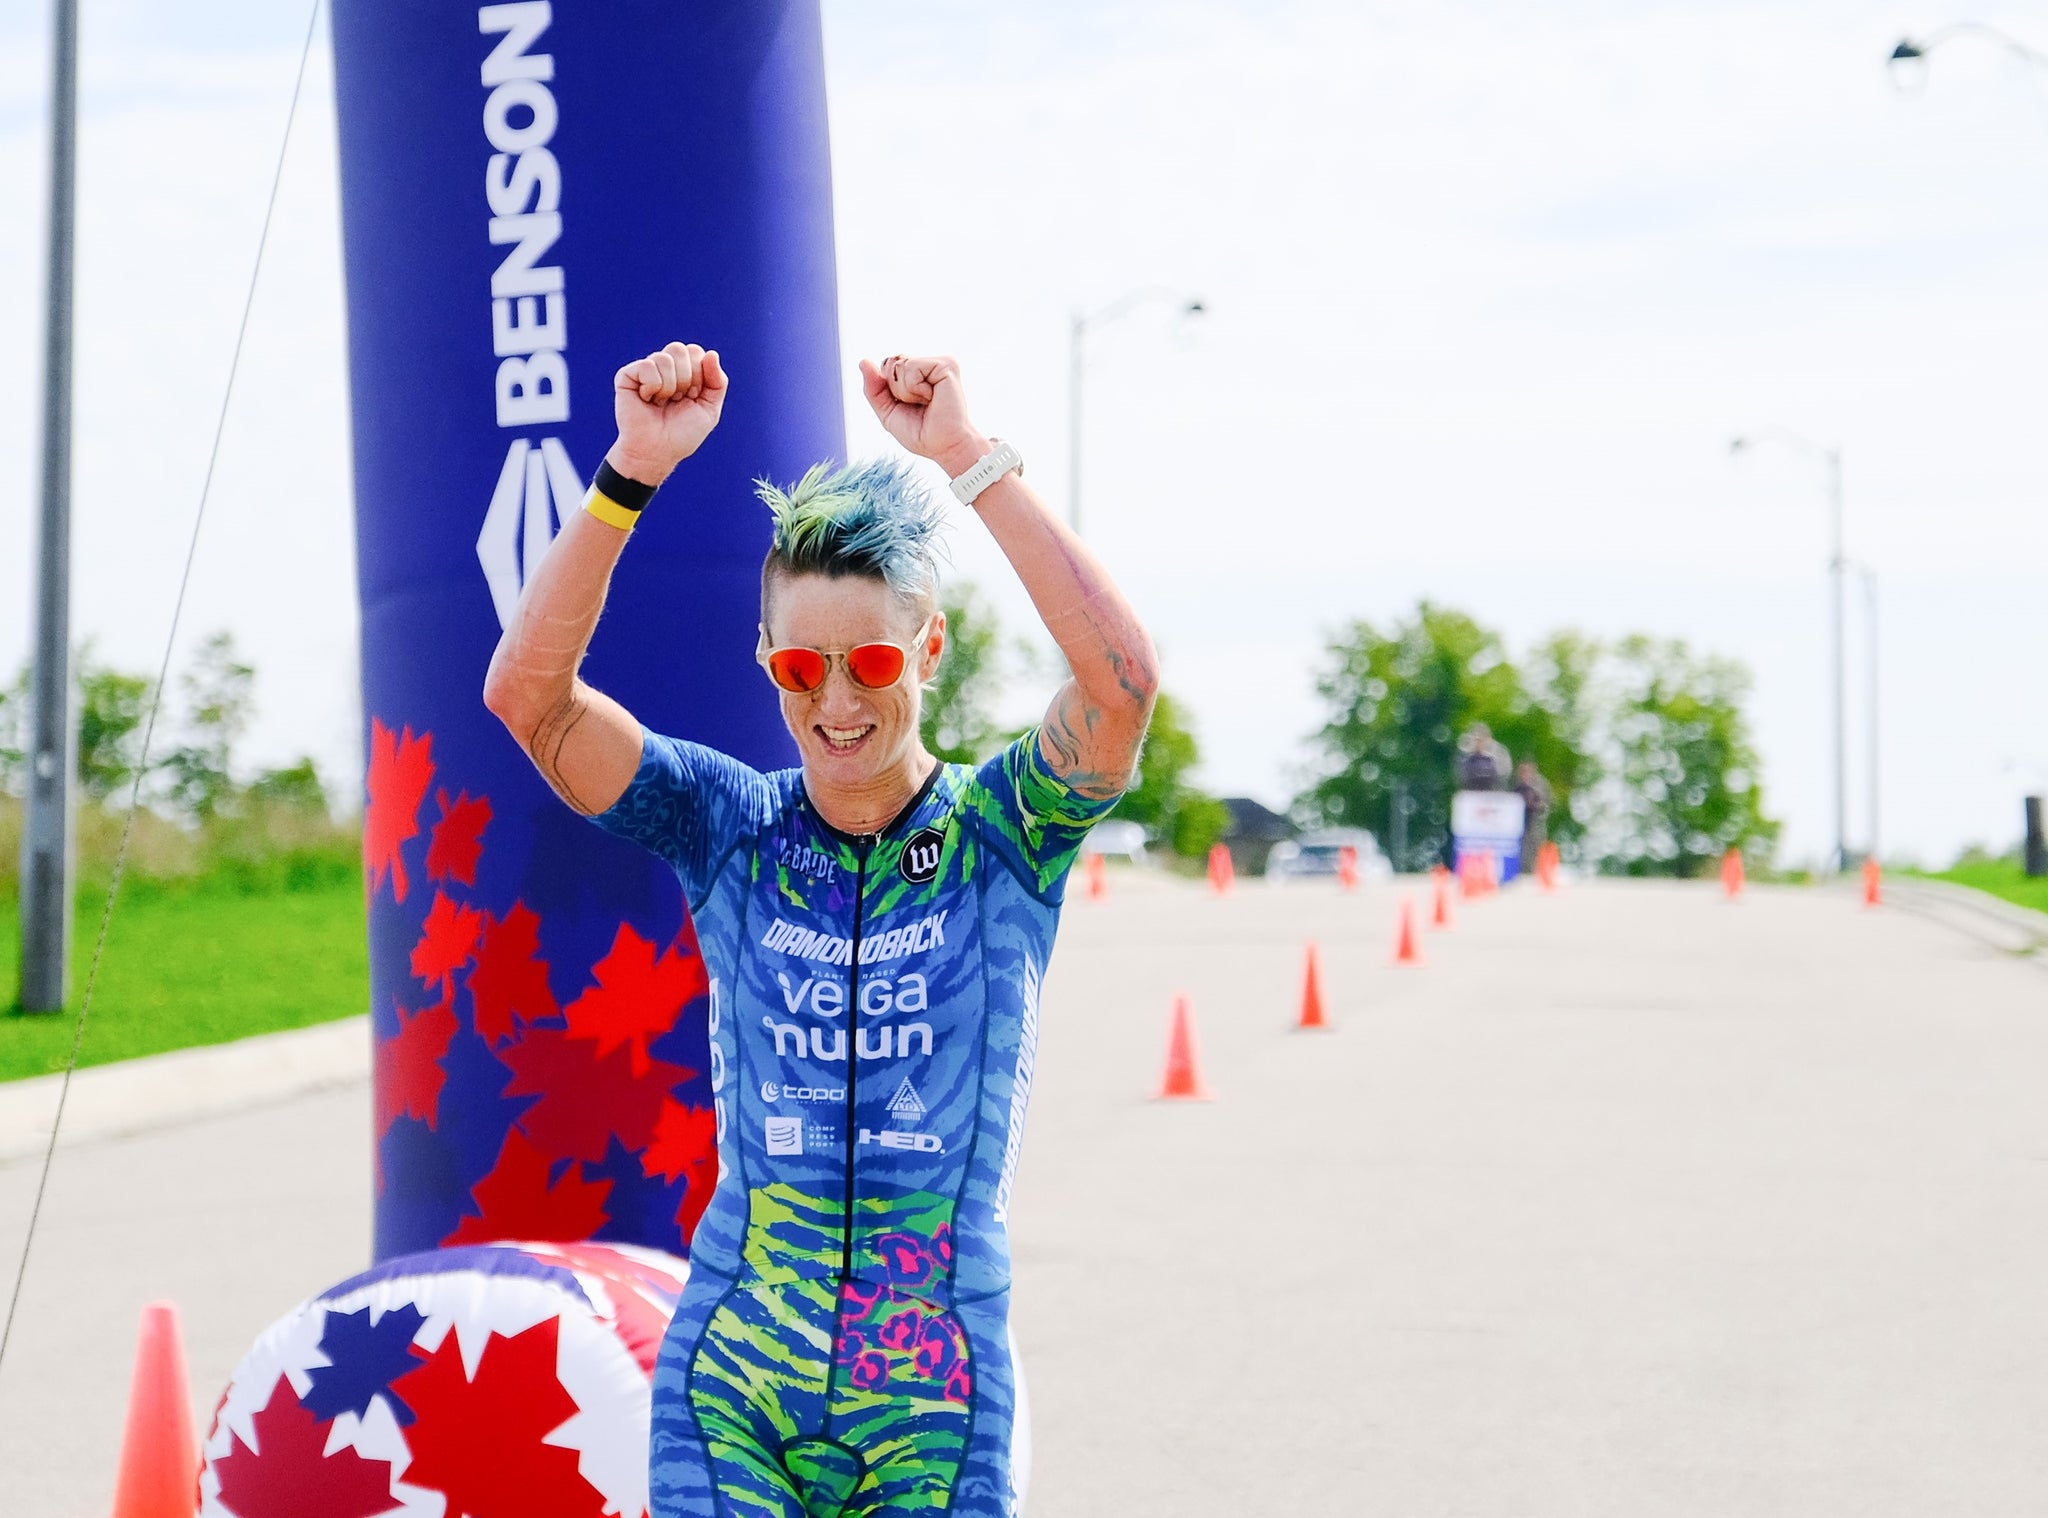 3 Simple Tips to Improve Your Athletic Performance with Professional Triathlete Rach McBride